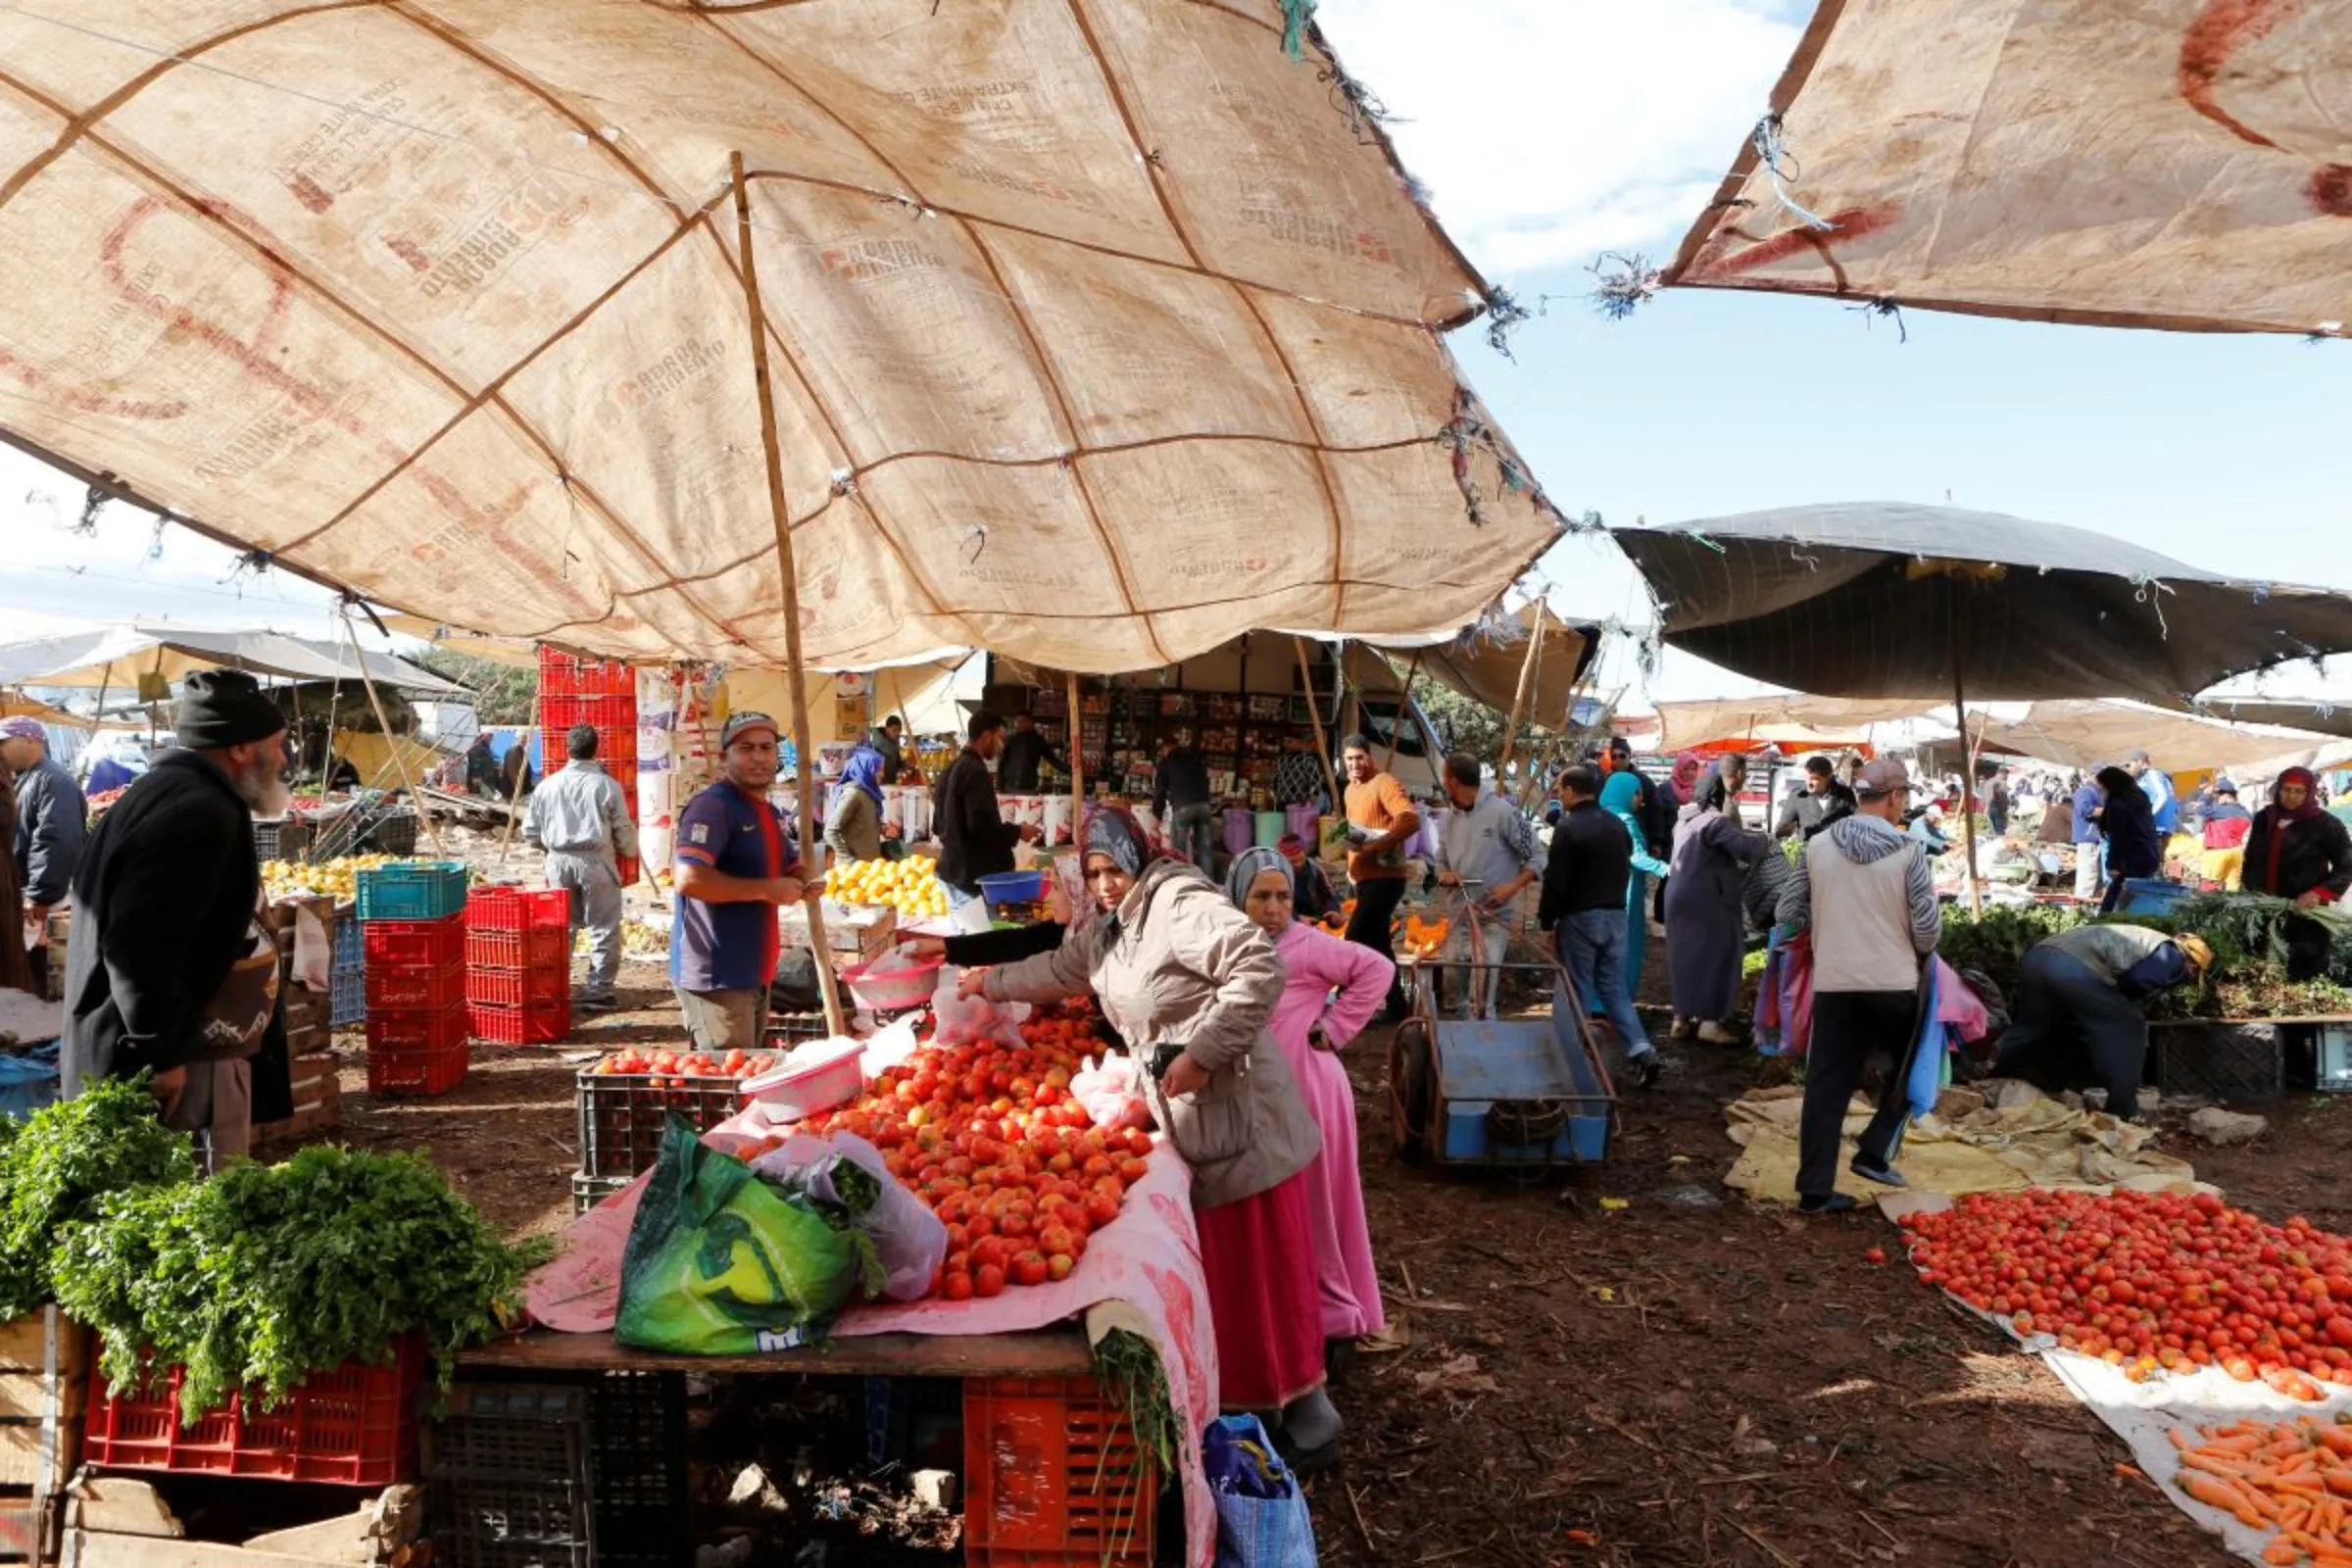 People shop at a vegetable market on the outskirts of Casablanca, Morocco, October 23, 2019